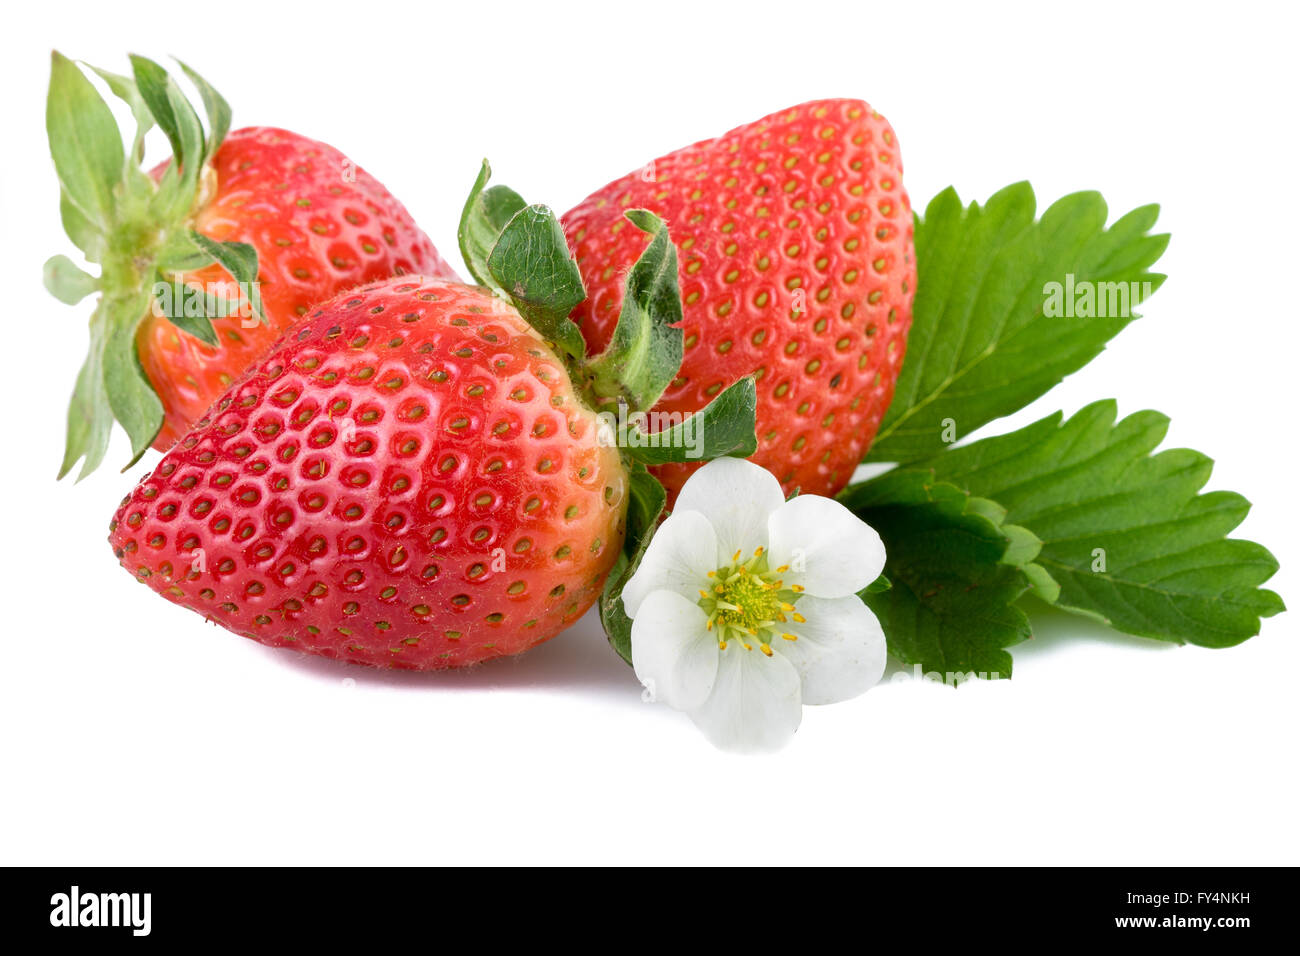 Strawberry with leaf closeup. Stock Photo